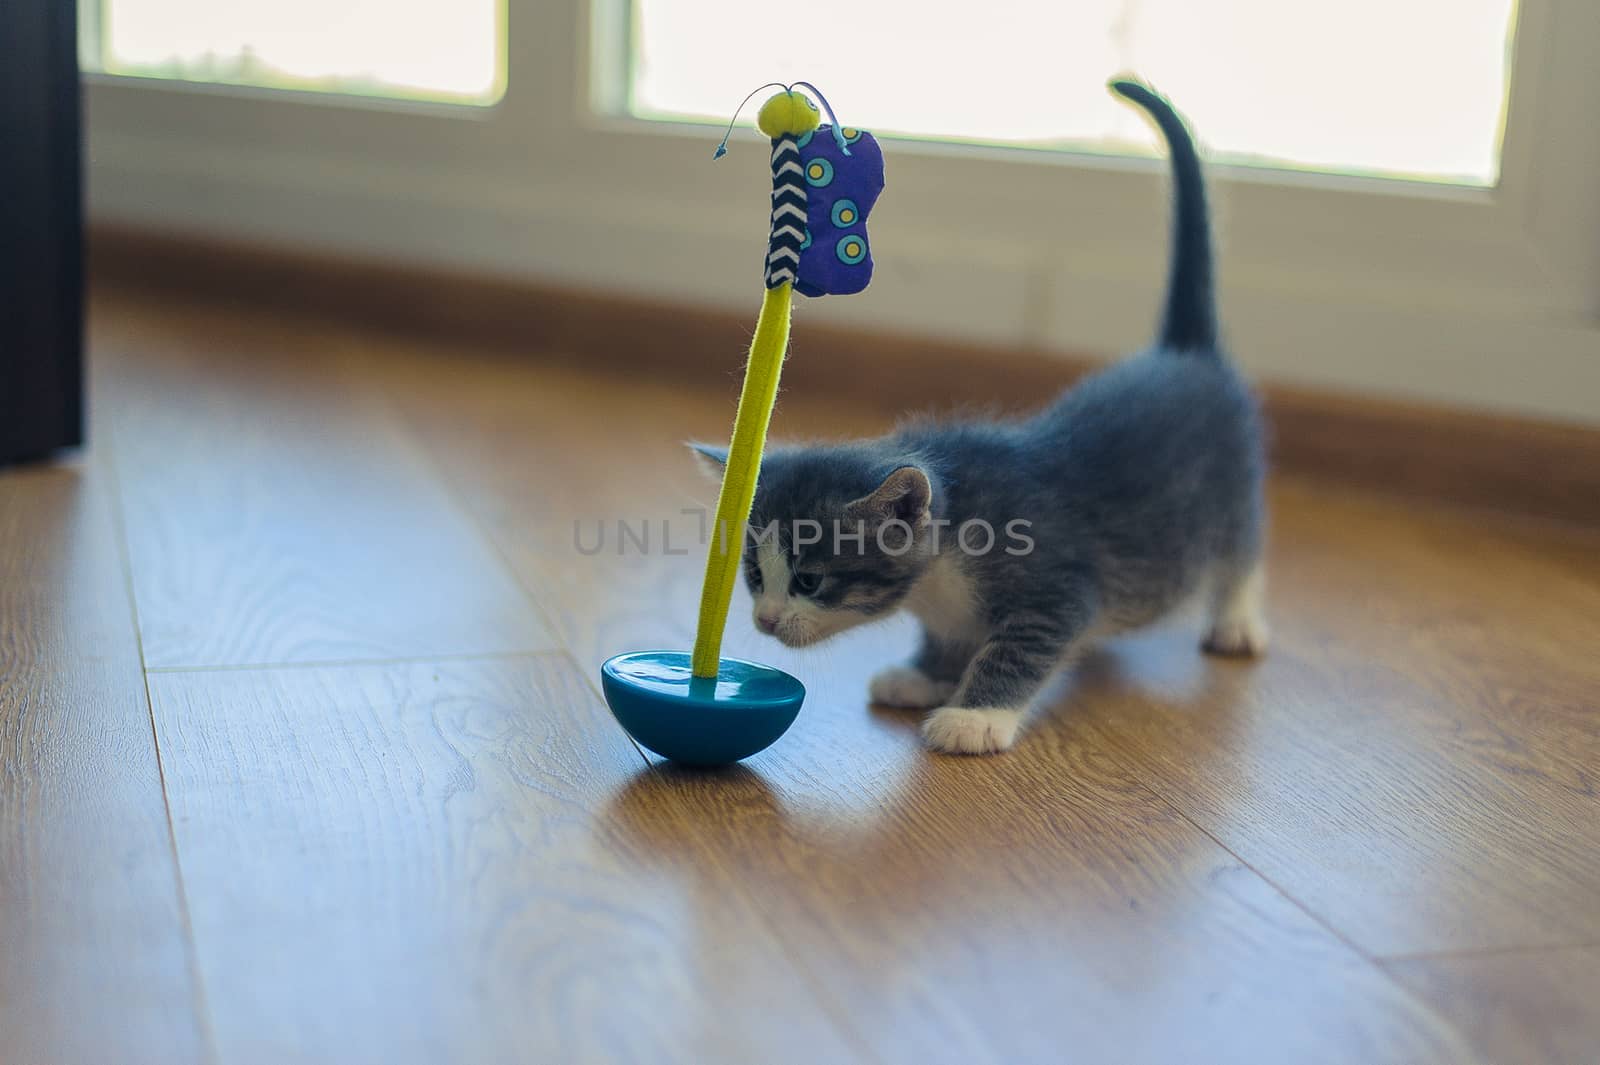 gray kitten is played with a round-bottomed toy on a wooden floor by chernobrovin